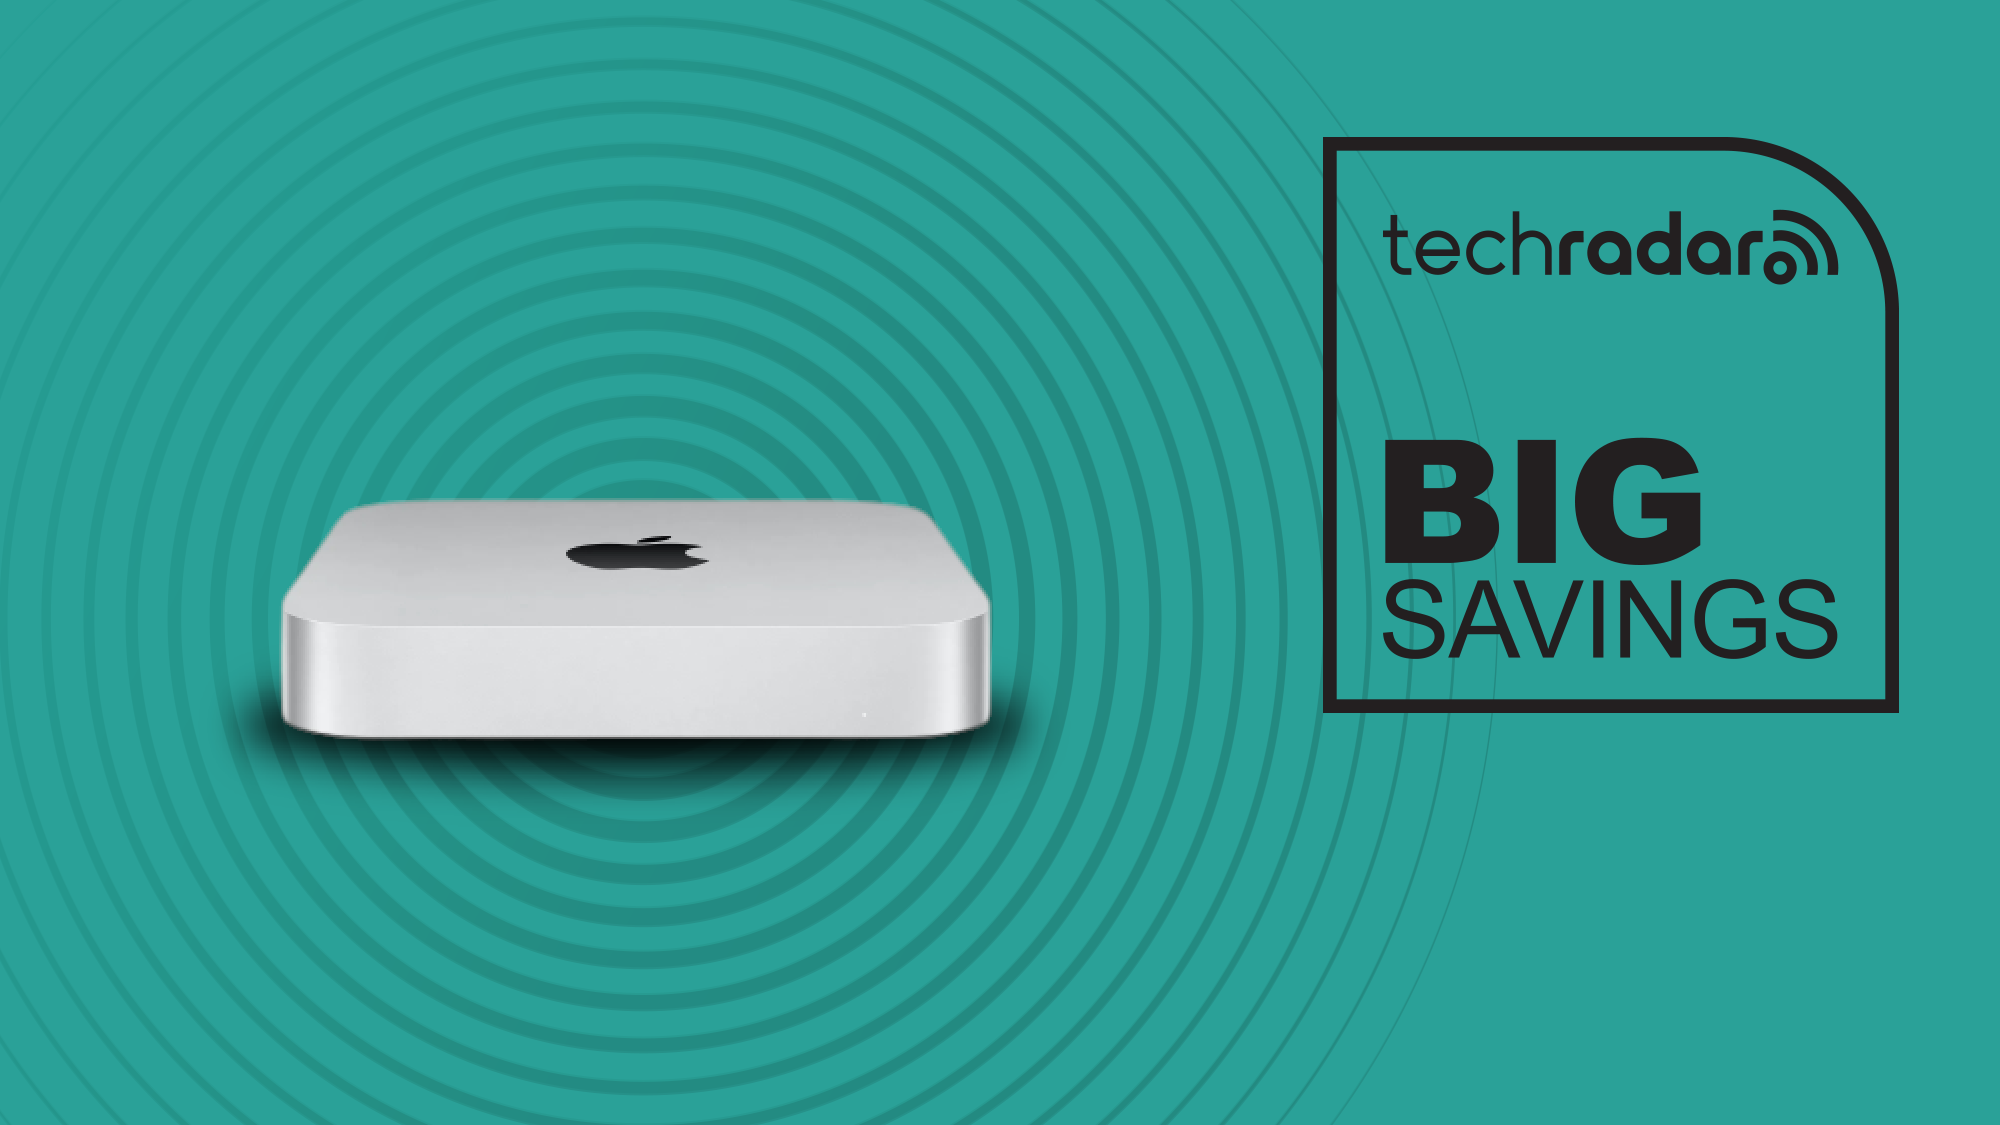 Apple's M2 Mac Mini is up to $109 off ahead of Black Friday